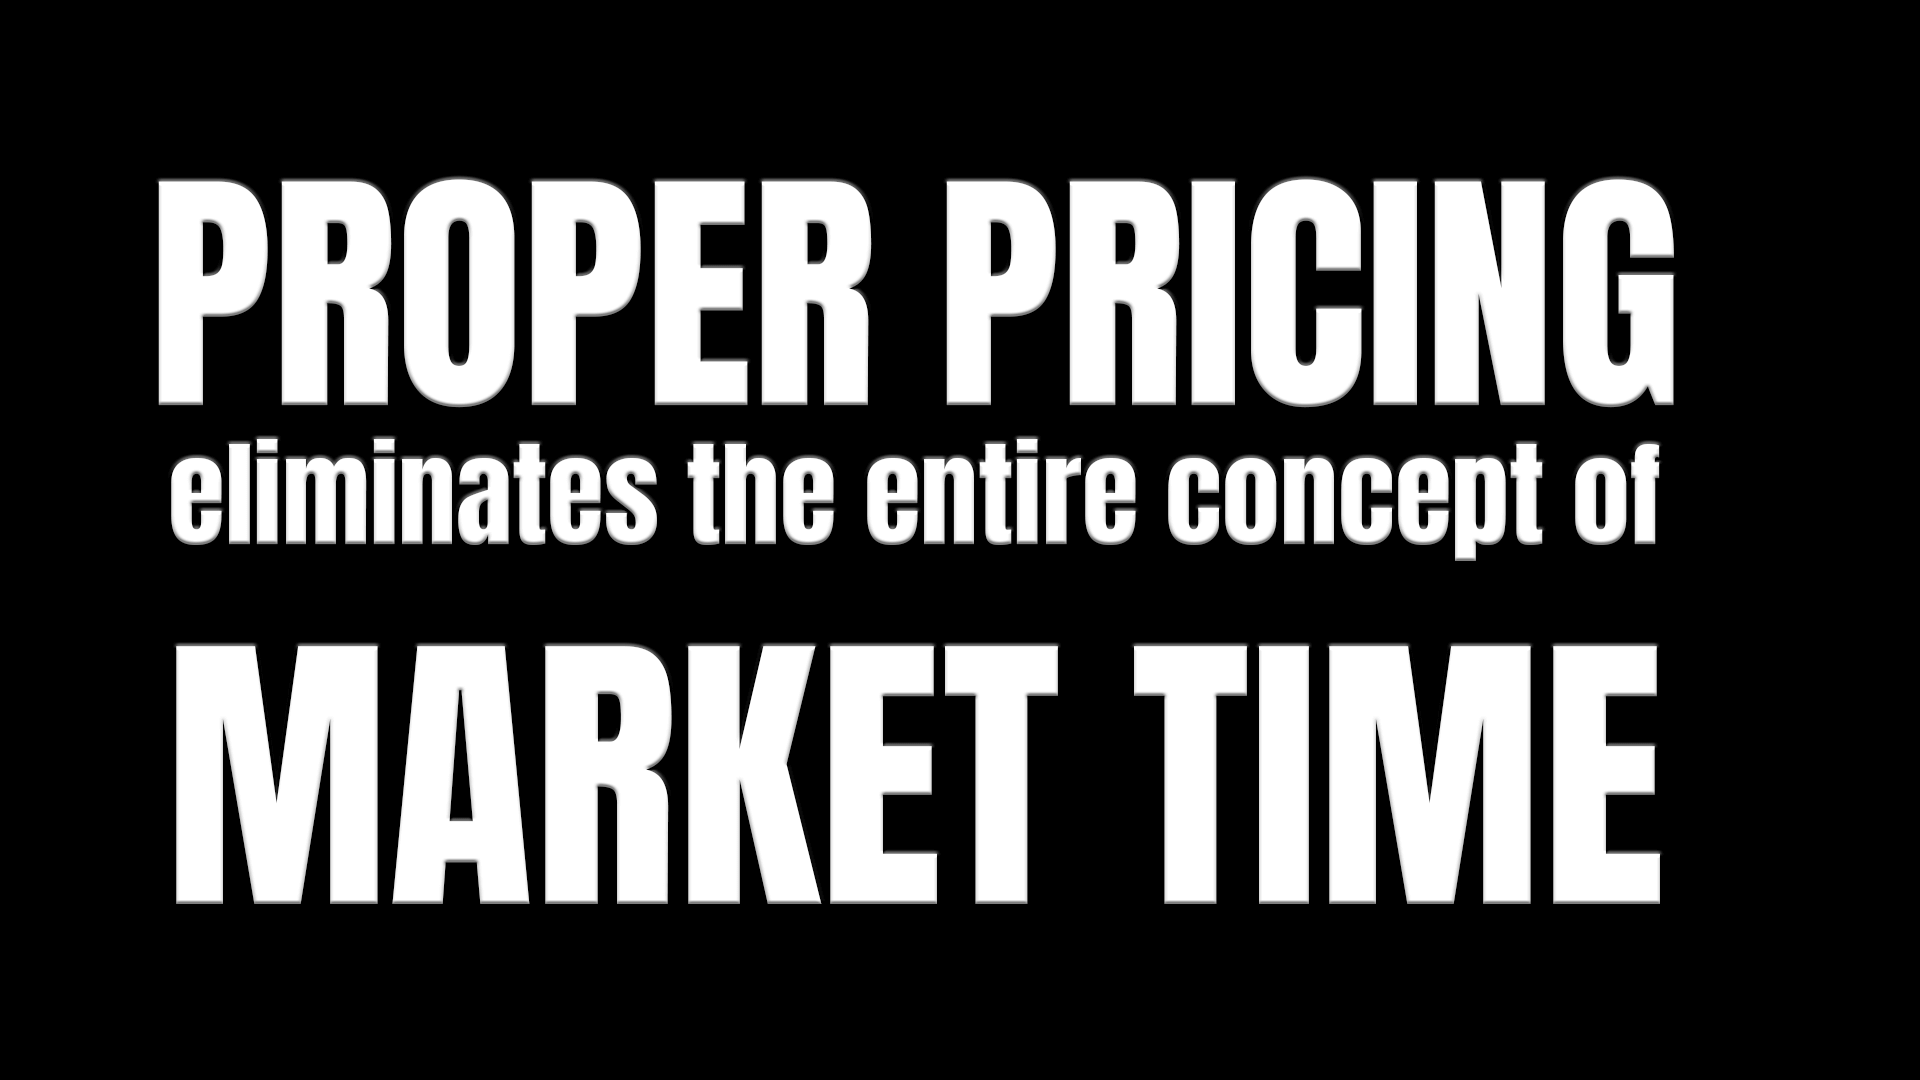 Proper pricing eliminates the entire concept of market time